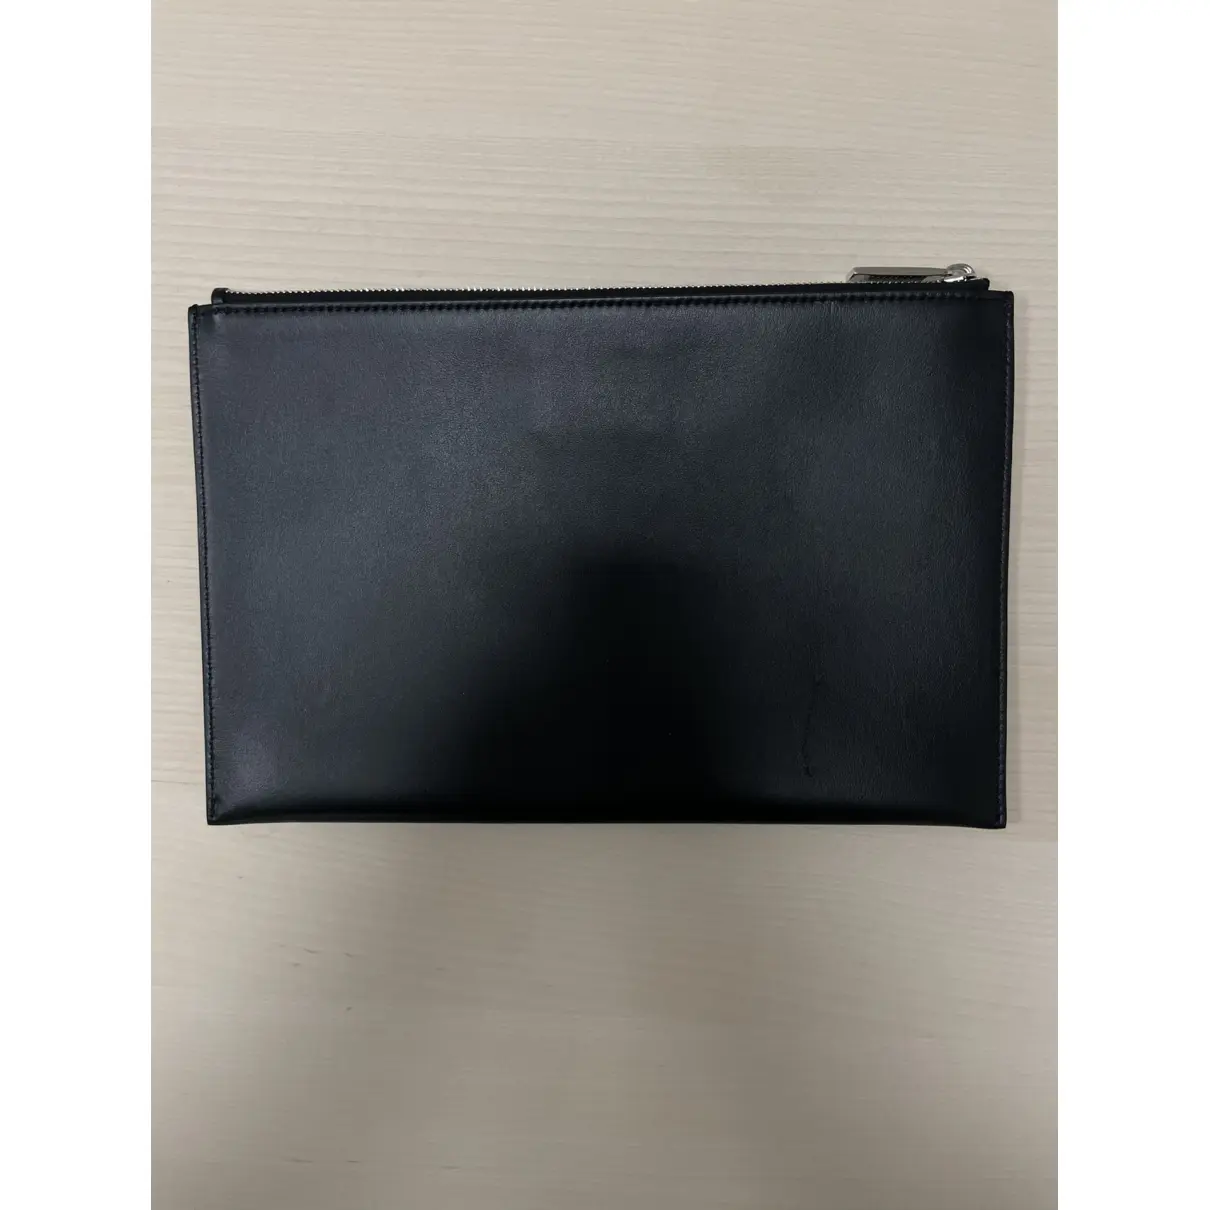 Buy Dior Homme Leather small bag online